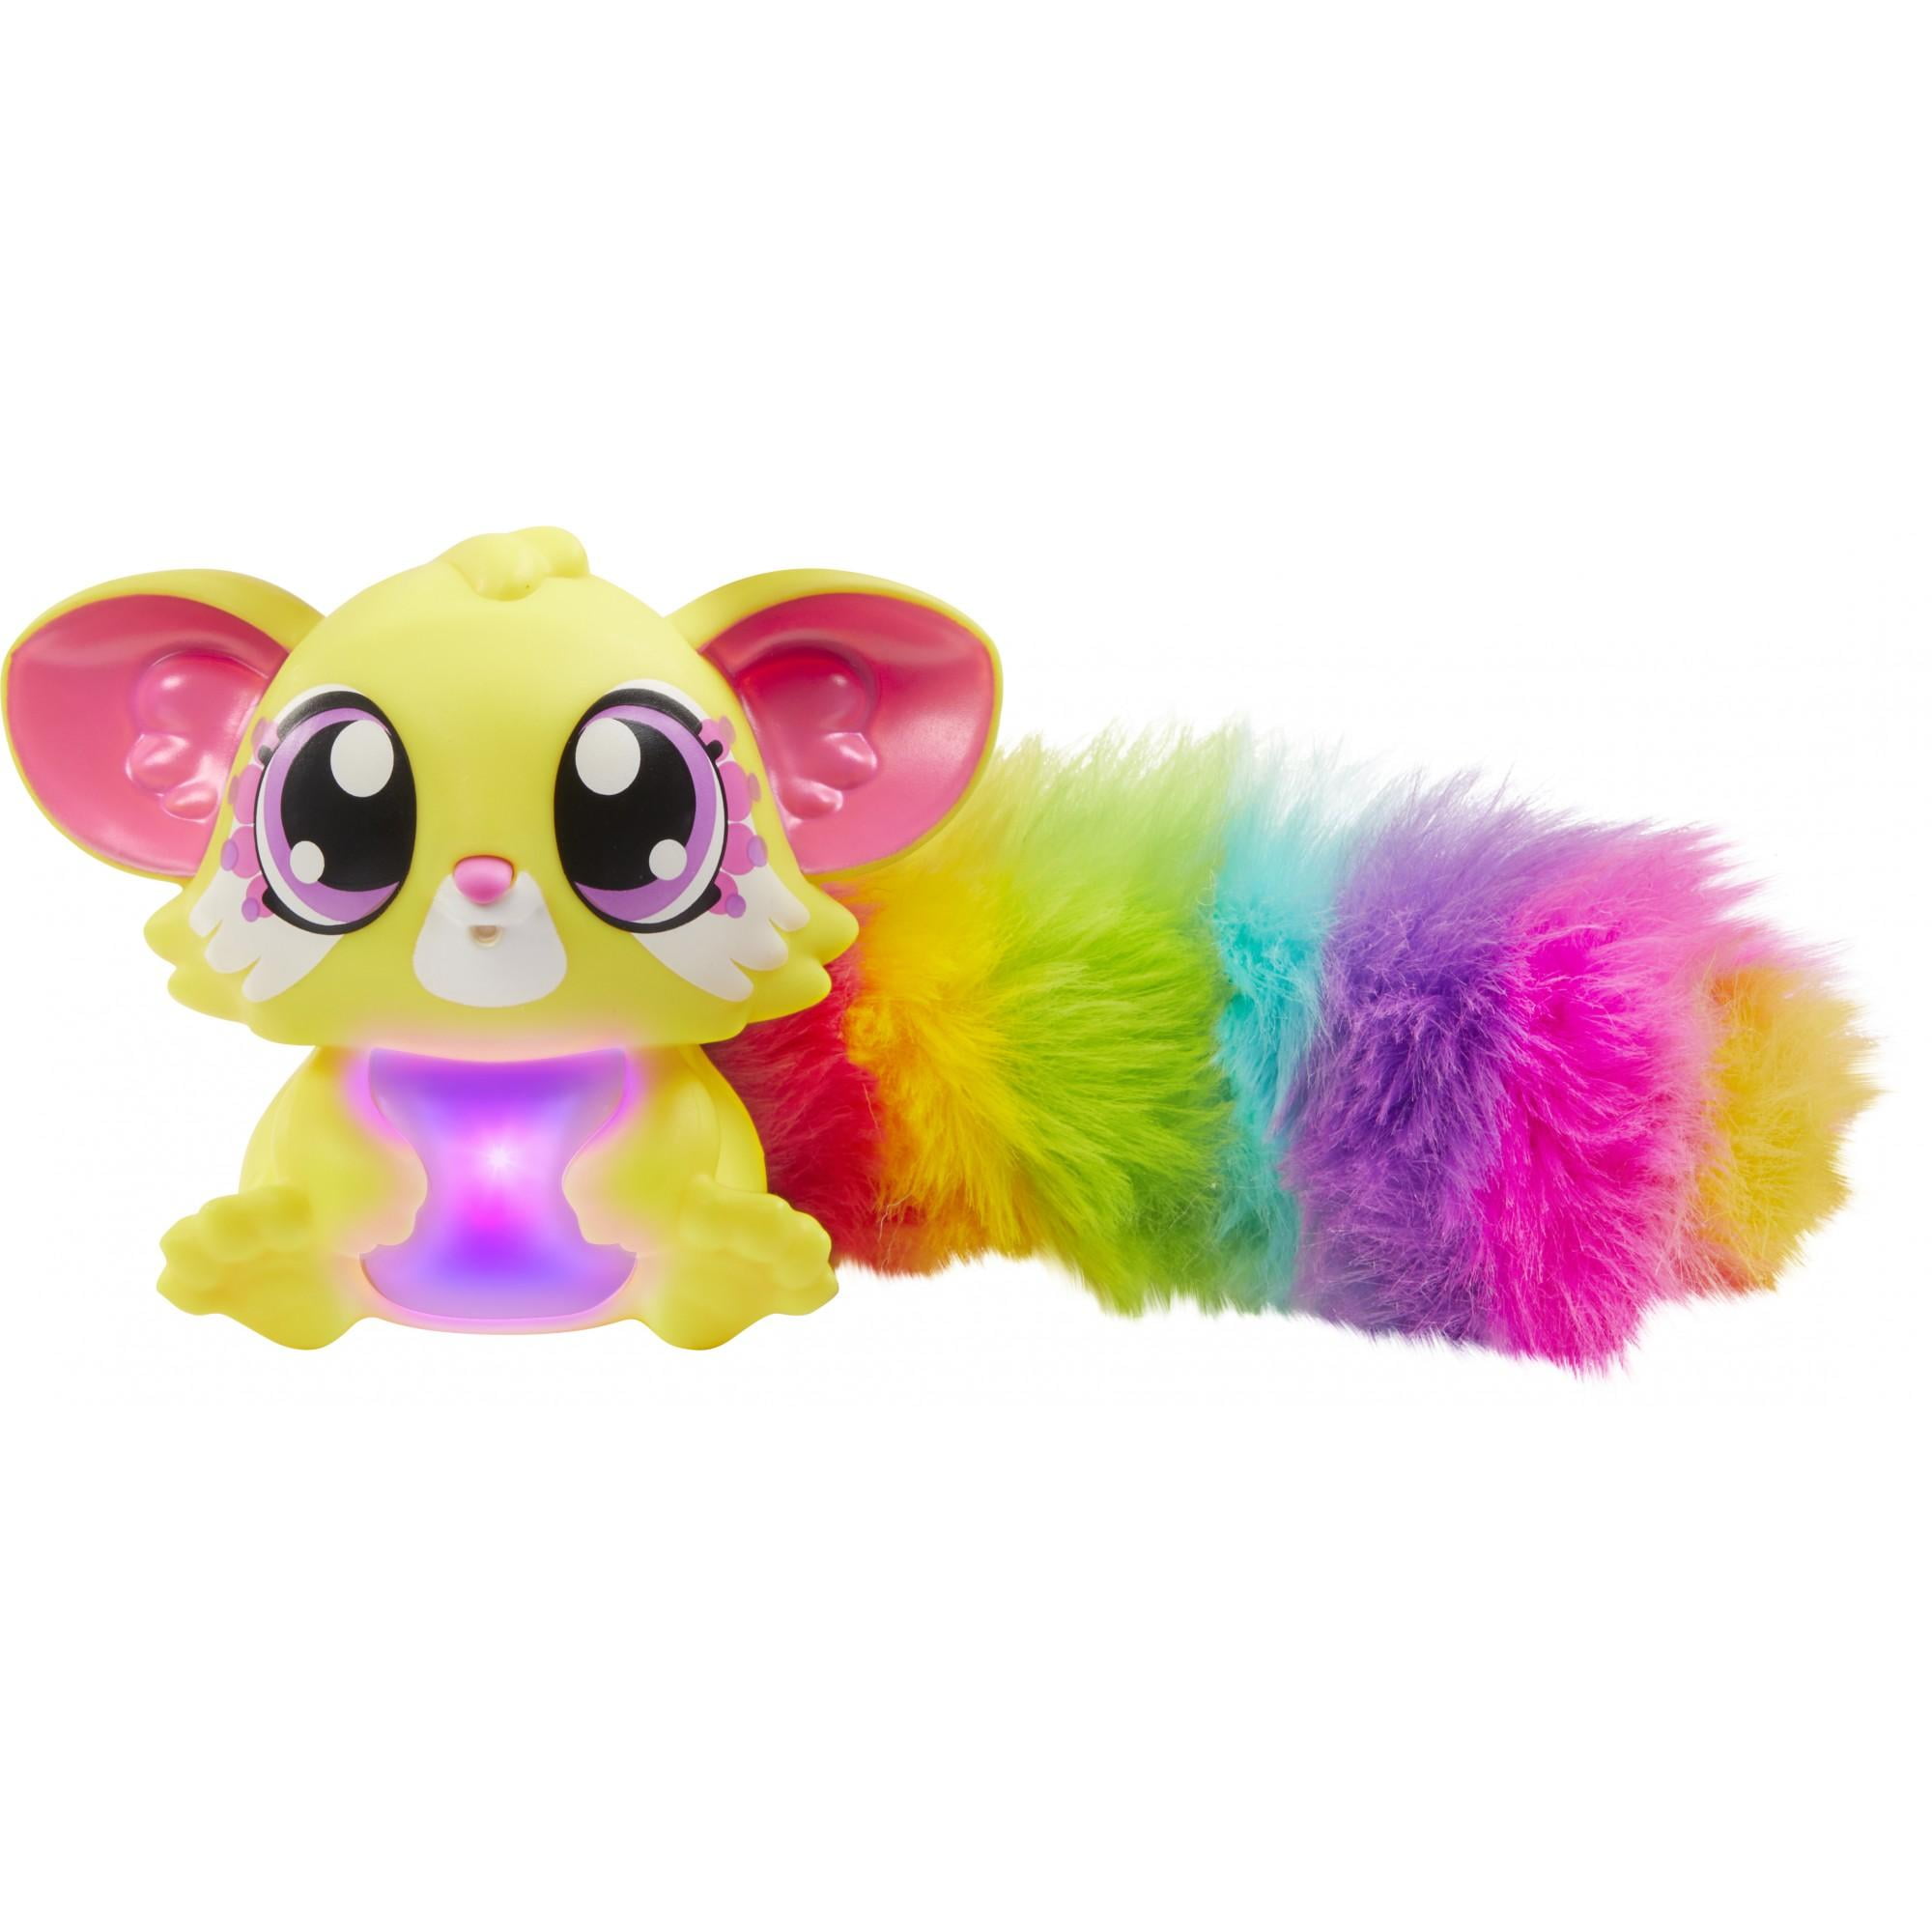 Lil' Gleemerz Babies Sounds & Light Up Tummy Mini Interactive Pet Toy with 25